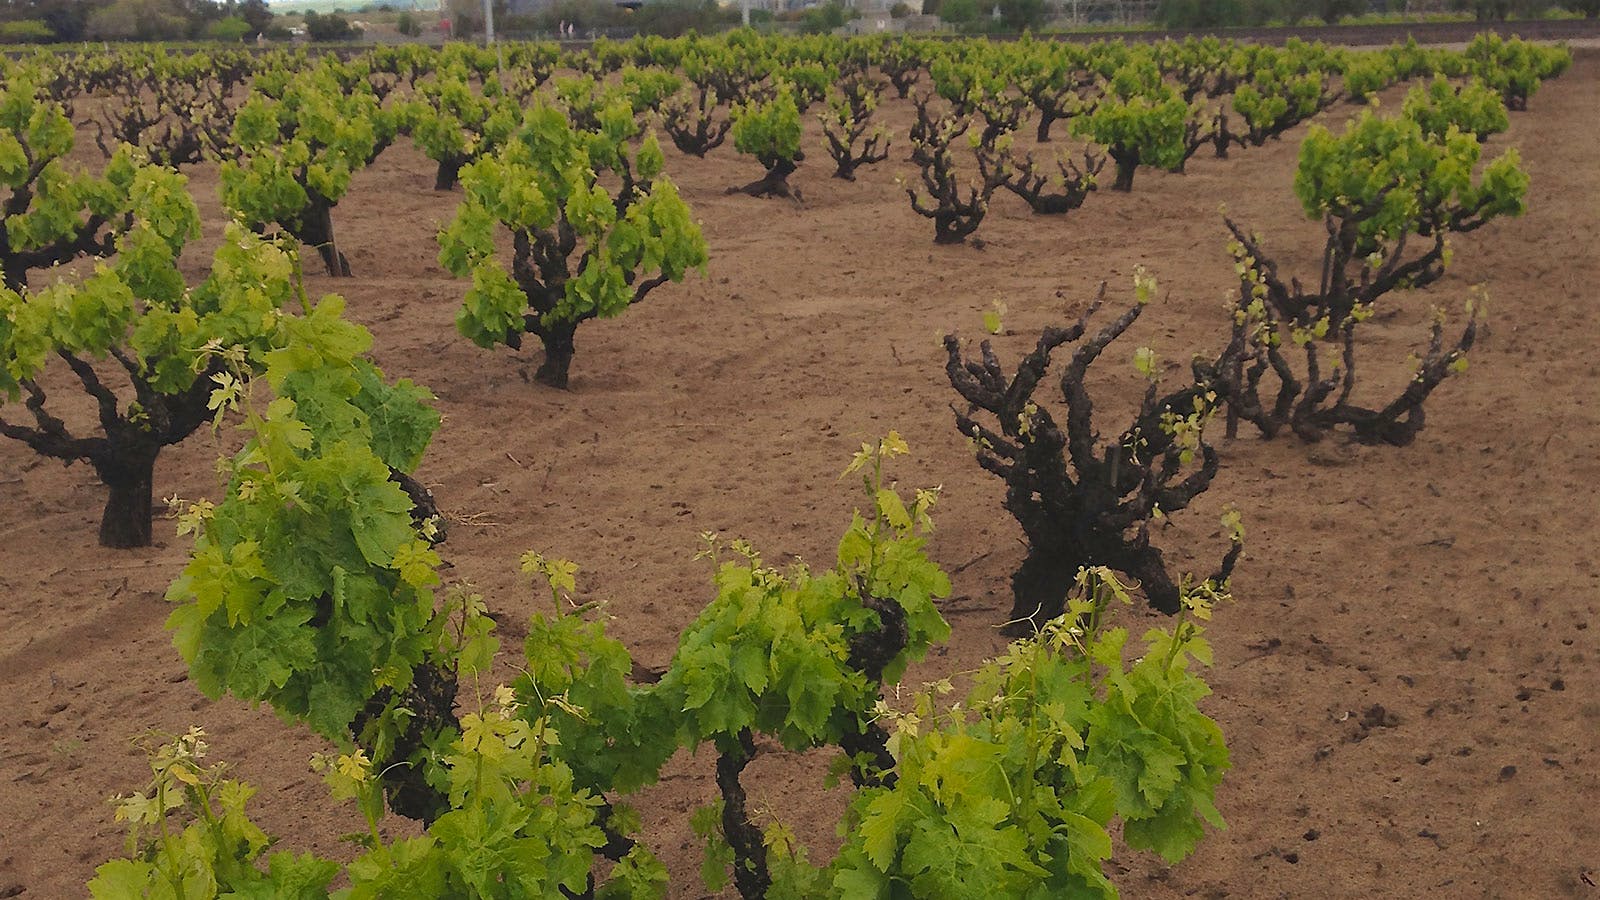 Own Rooted vs. Grafted Vines: Which Make Better Wines?